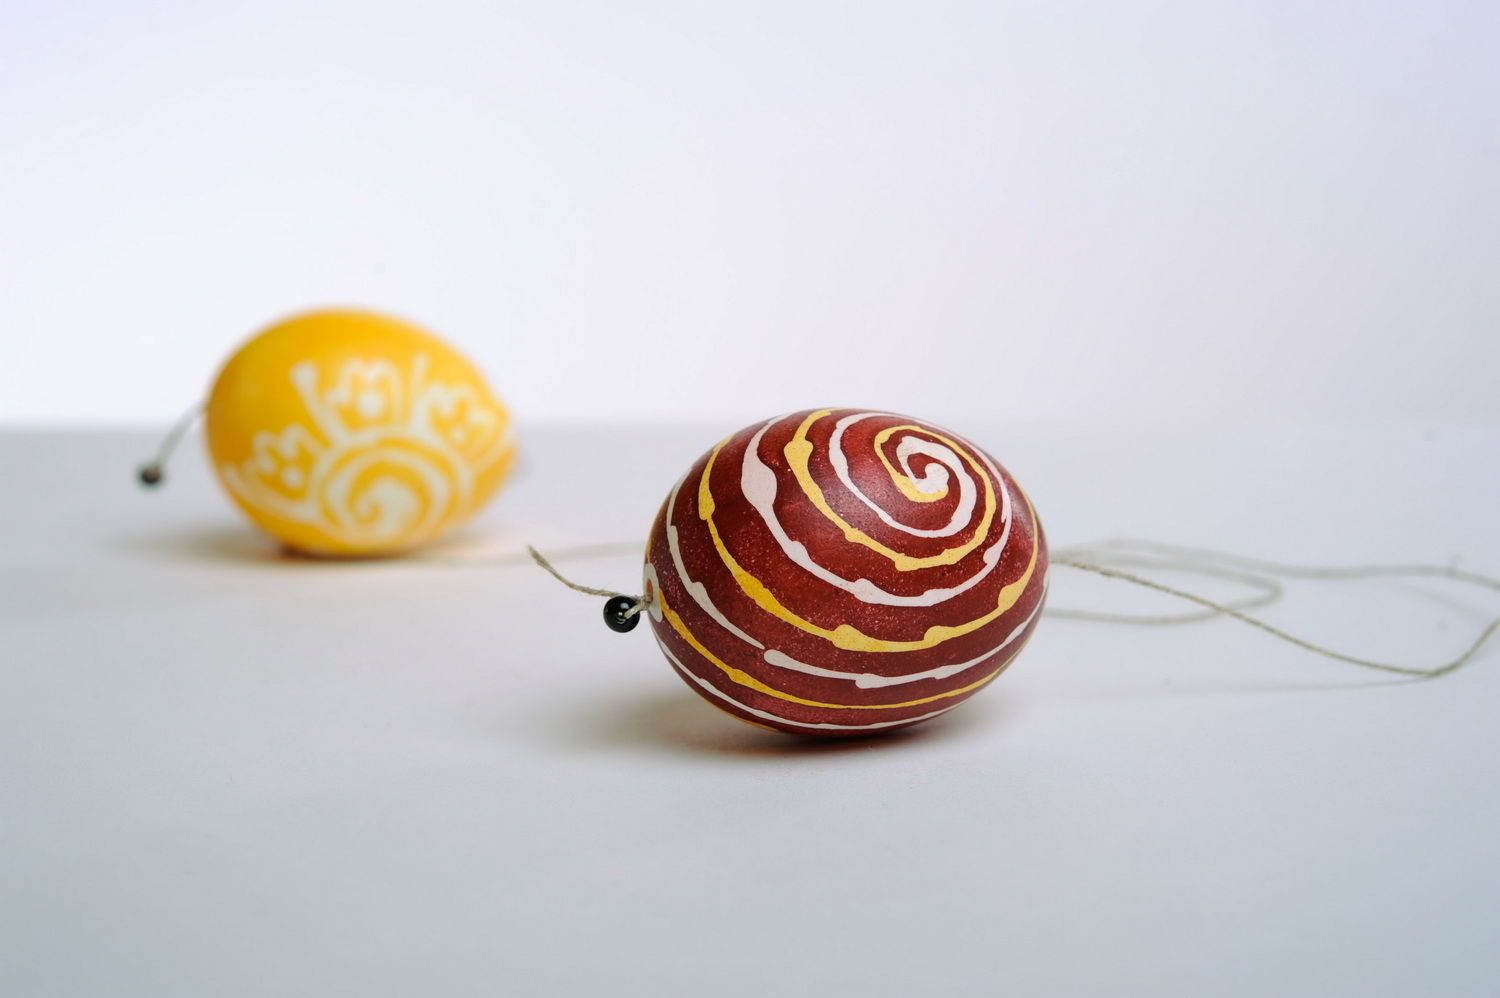 Interior pendant made of two painted eggs photo 2